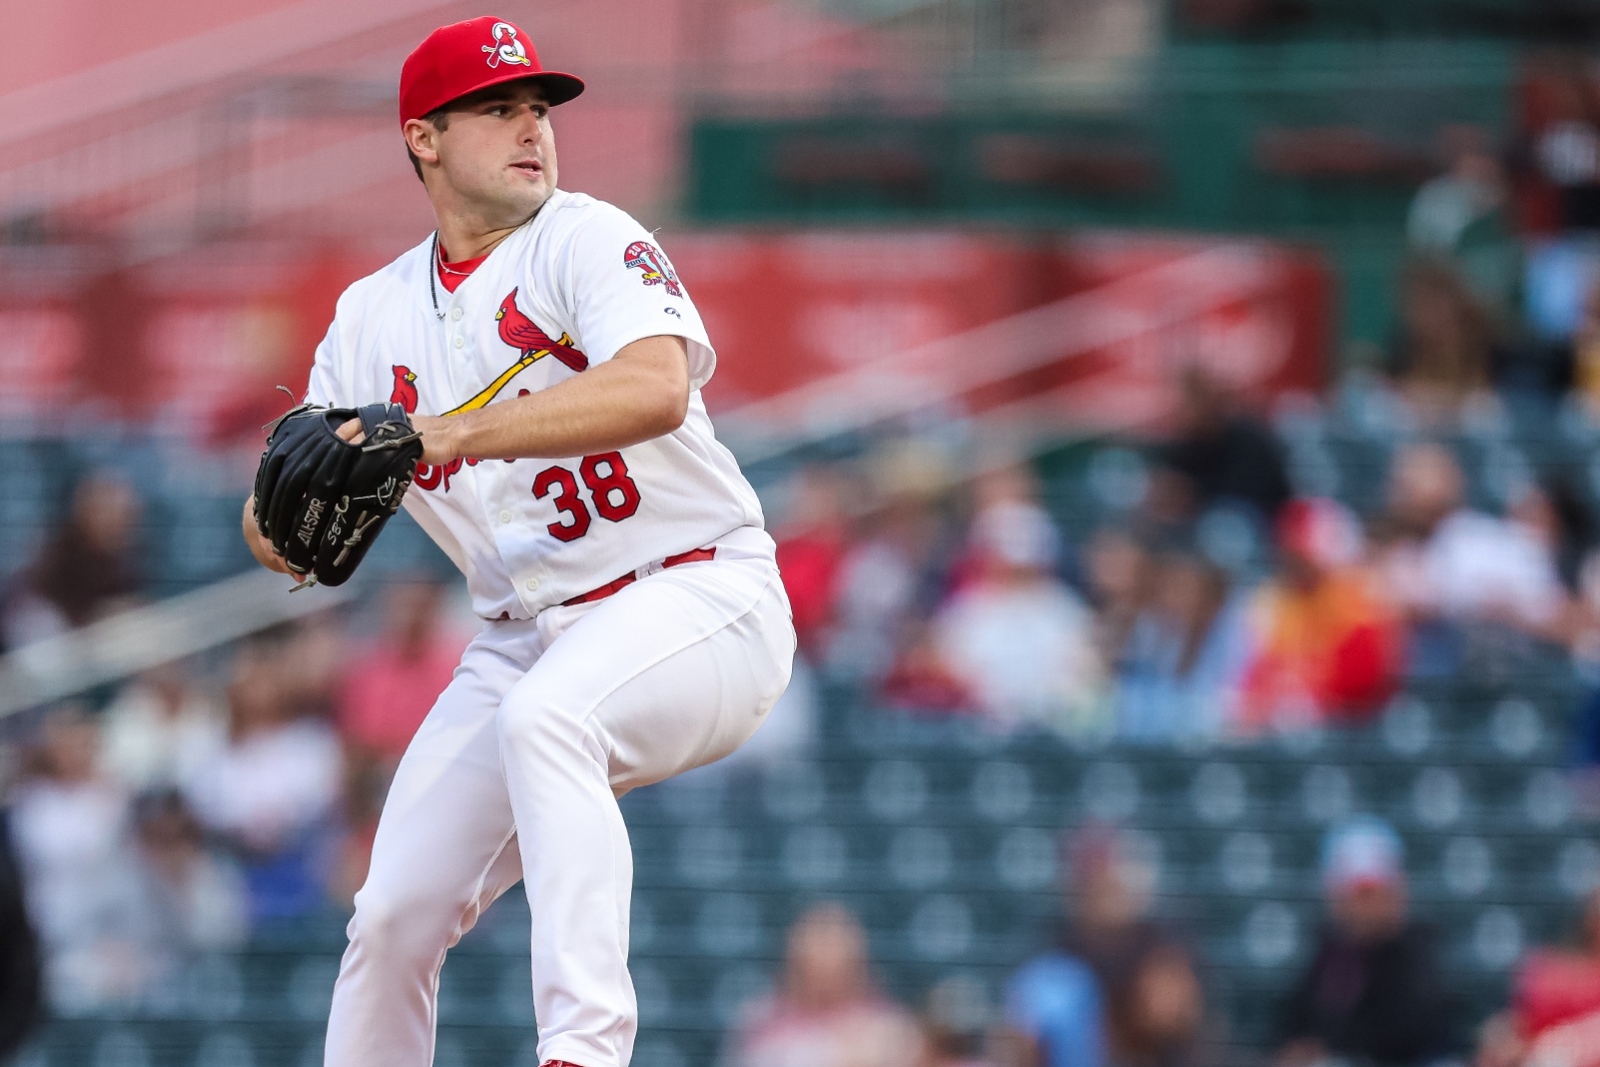 Max Rajcic, wearing a Springfield Cardinals uniform, pitches the baseball during a game at Hammons Field